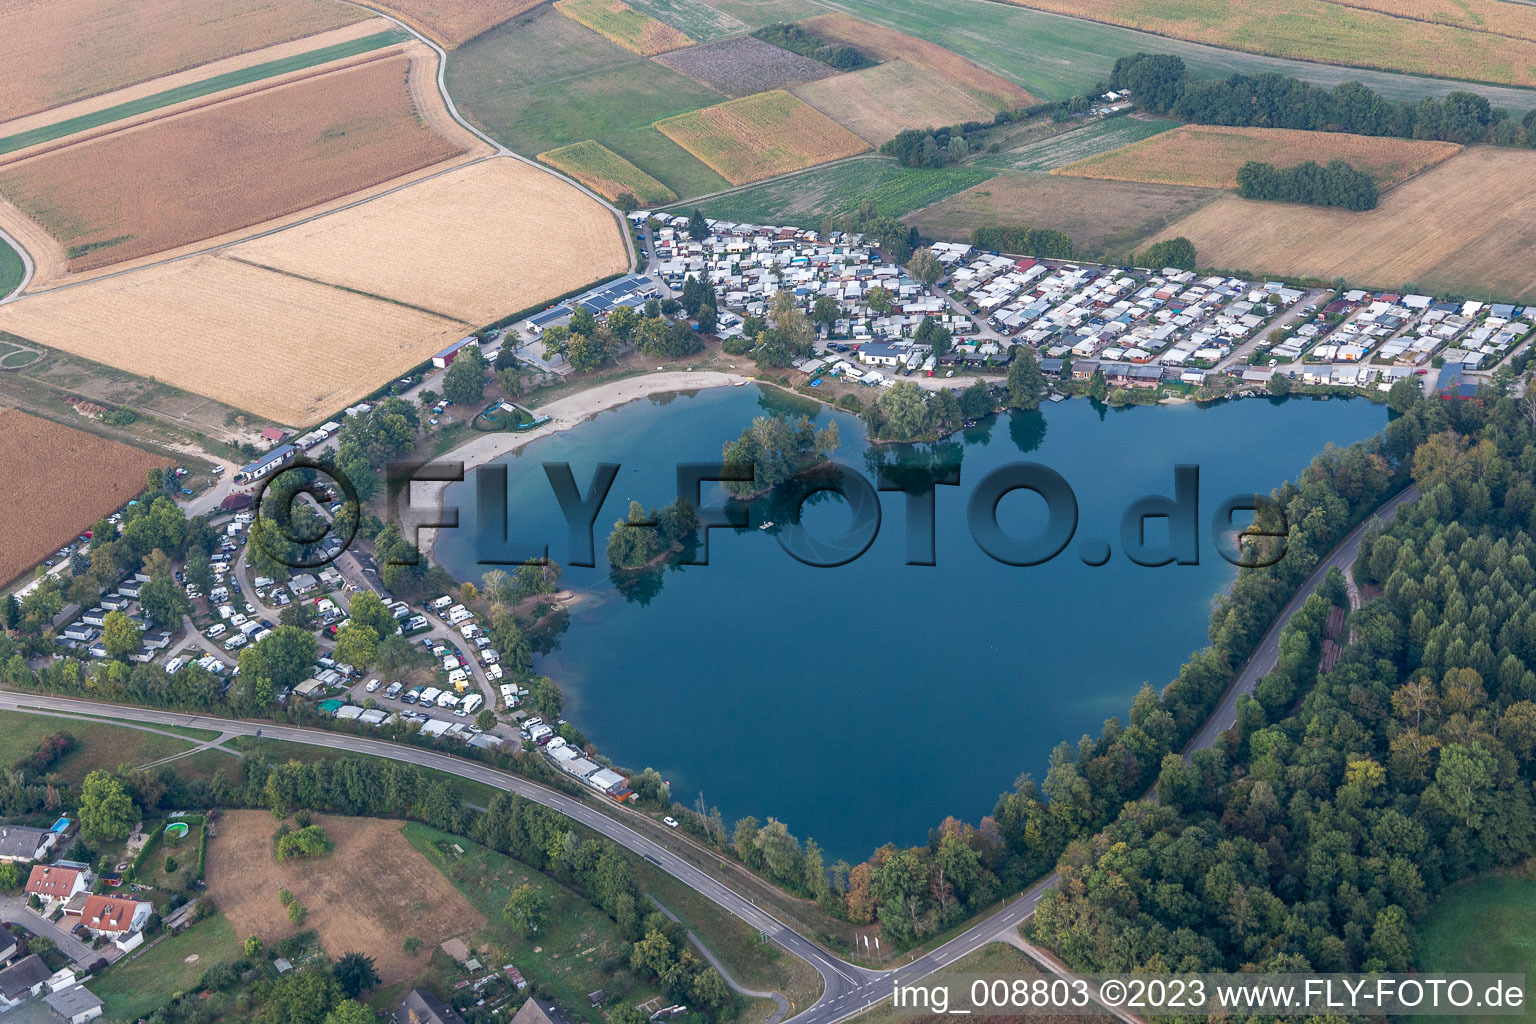 Aerial view of Camping with caravans and tents in the district Oberbruch in Buehl in the state Baden-Wuerttemberg, Germany